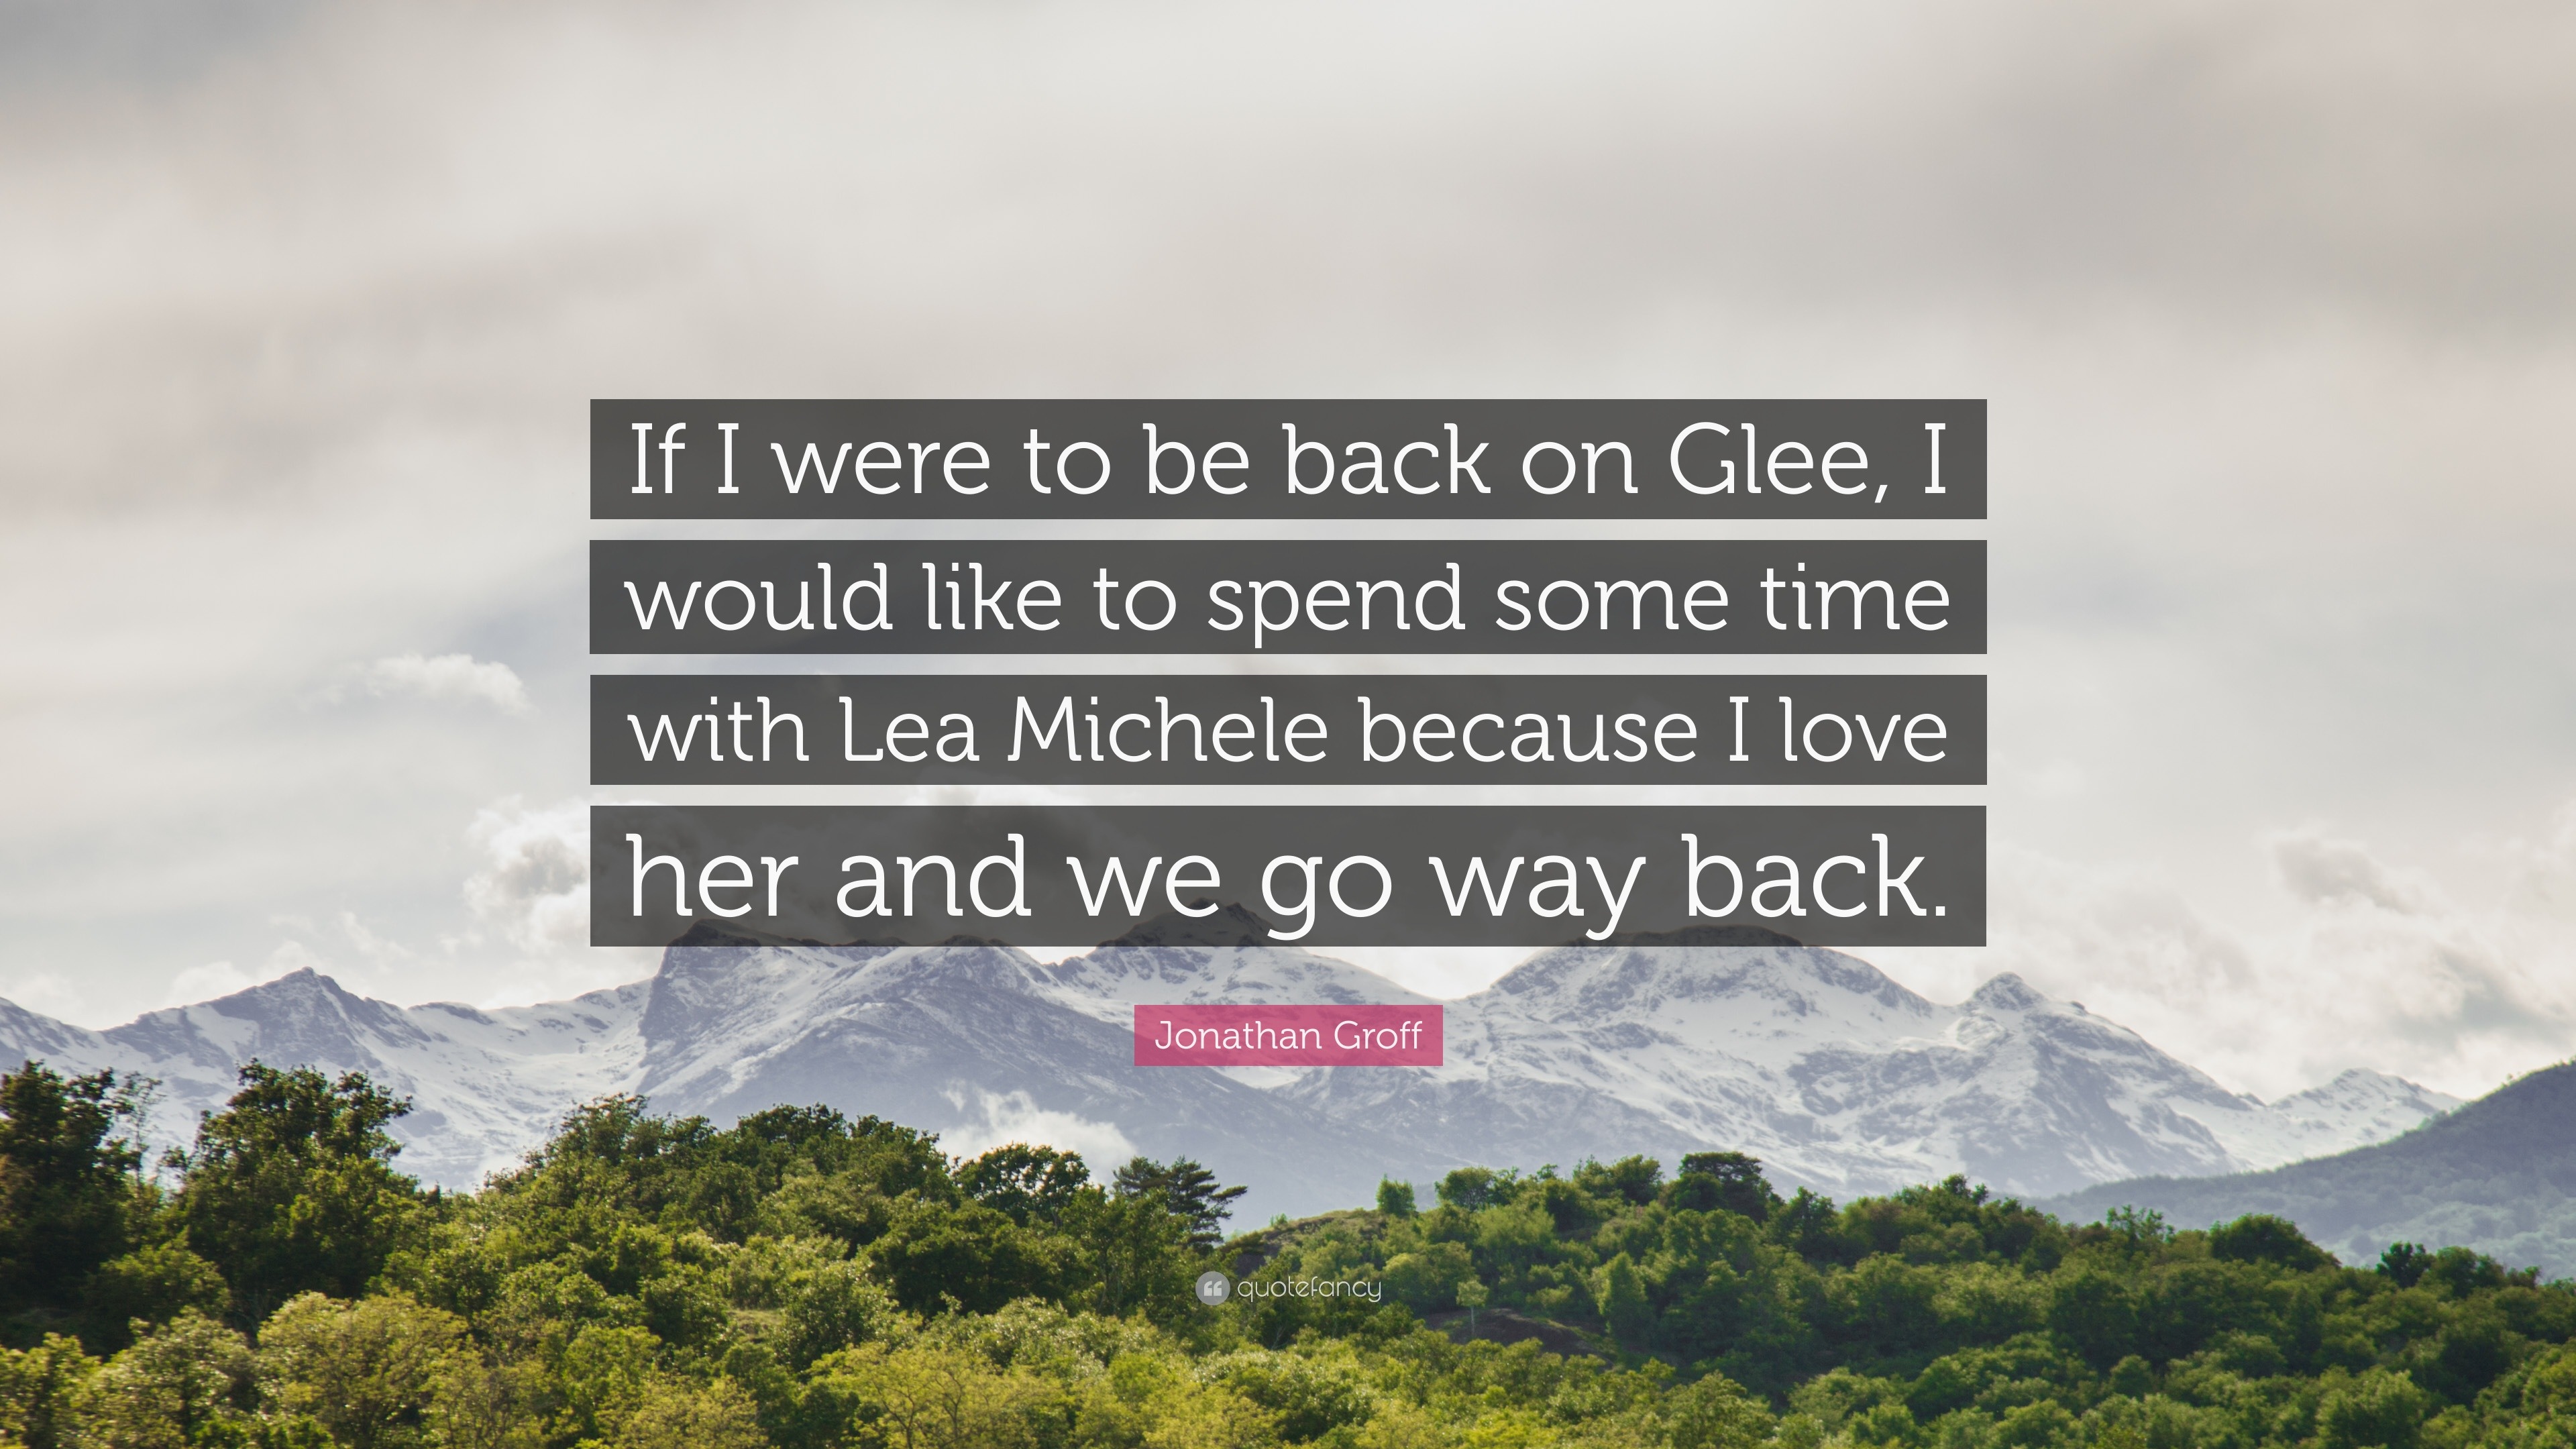 Jonathan Groff Quote If I Were To Be Back On Glee I Would Like To Spend